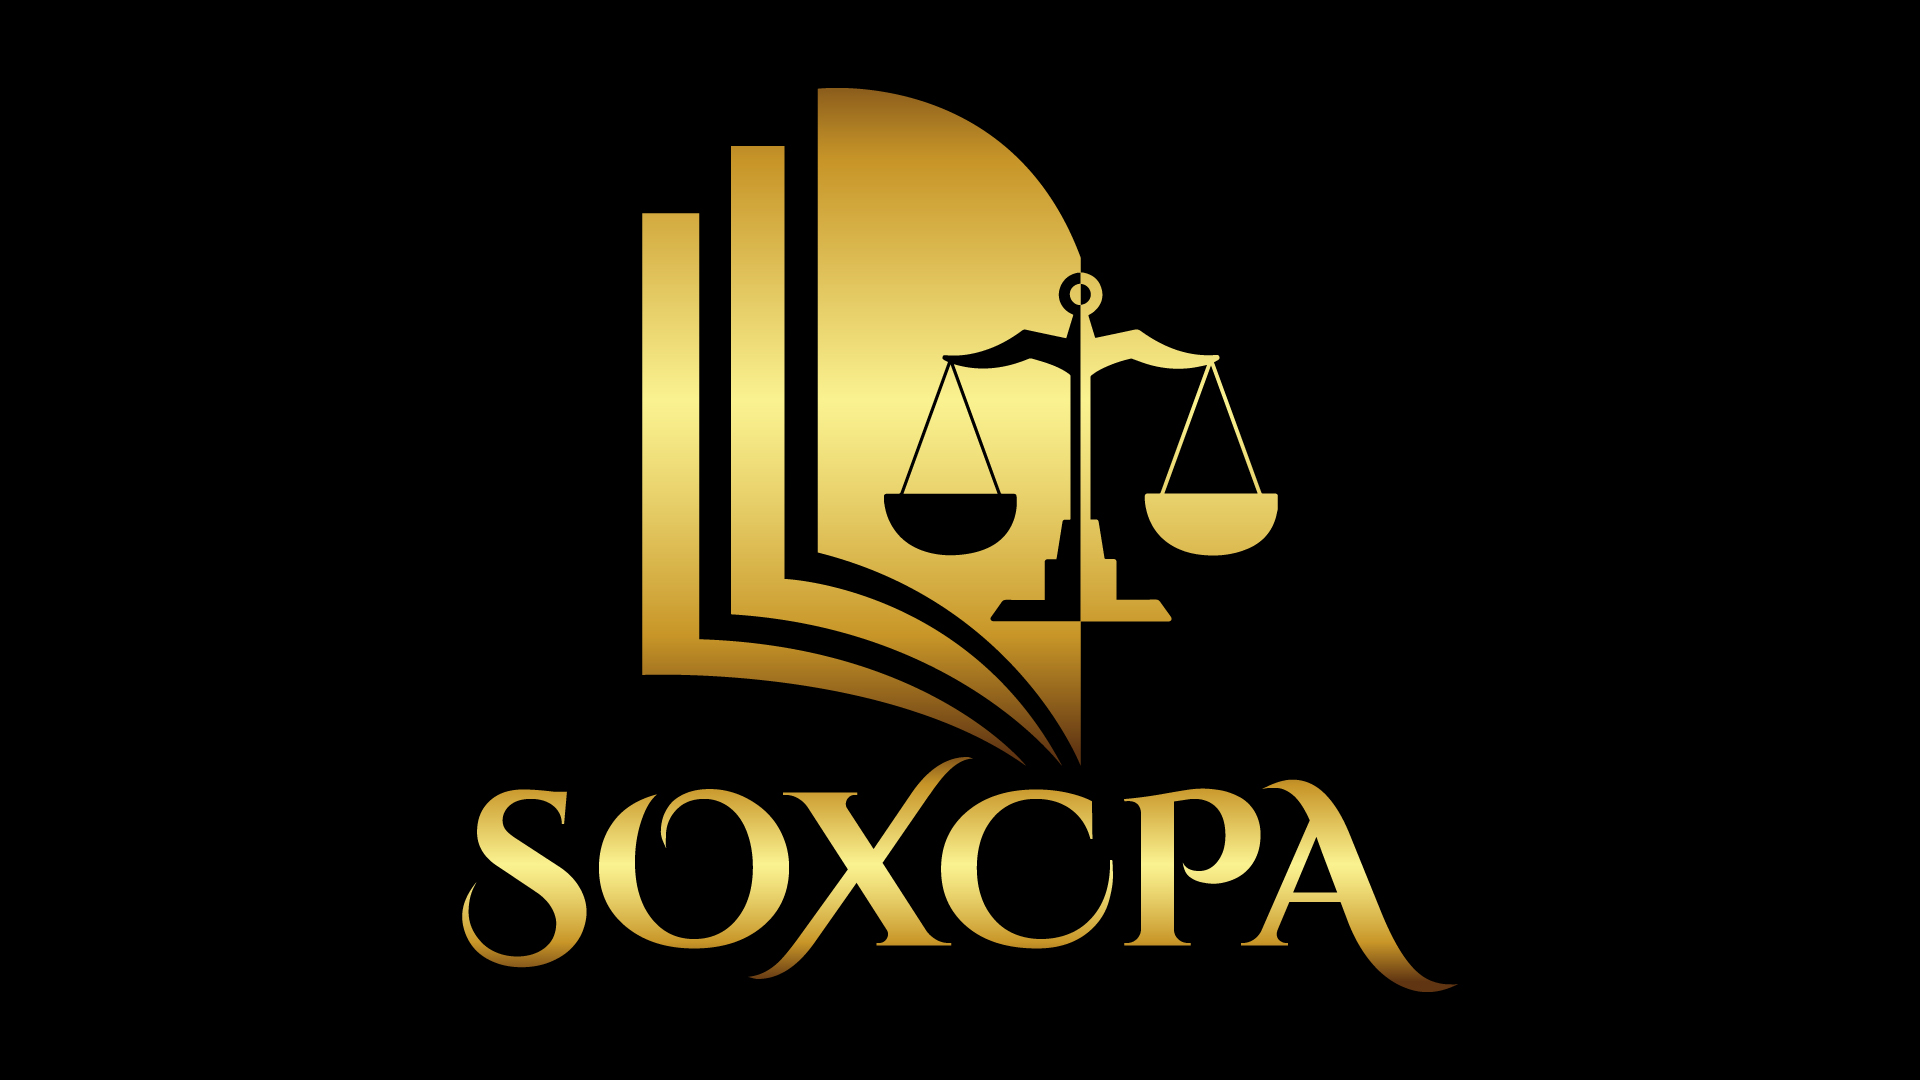 Sarbanes Oxley Compliance Professionals Association (SOXCPA)